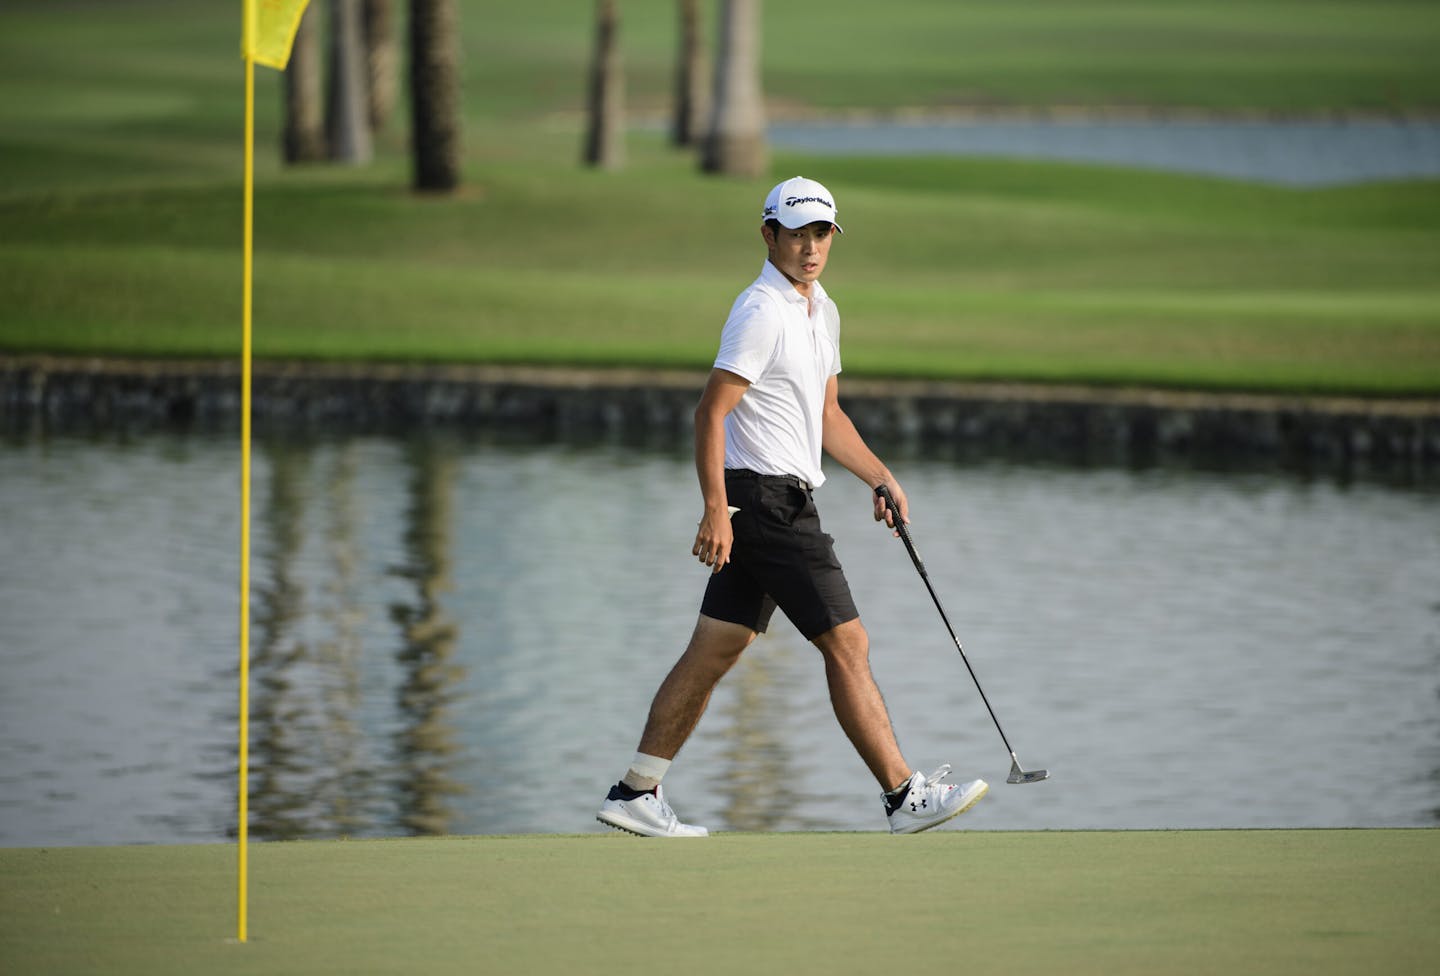 Keita Nakajima of Japan lines up a putt on the 18th tee during round 4